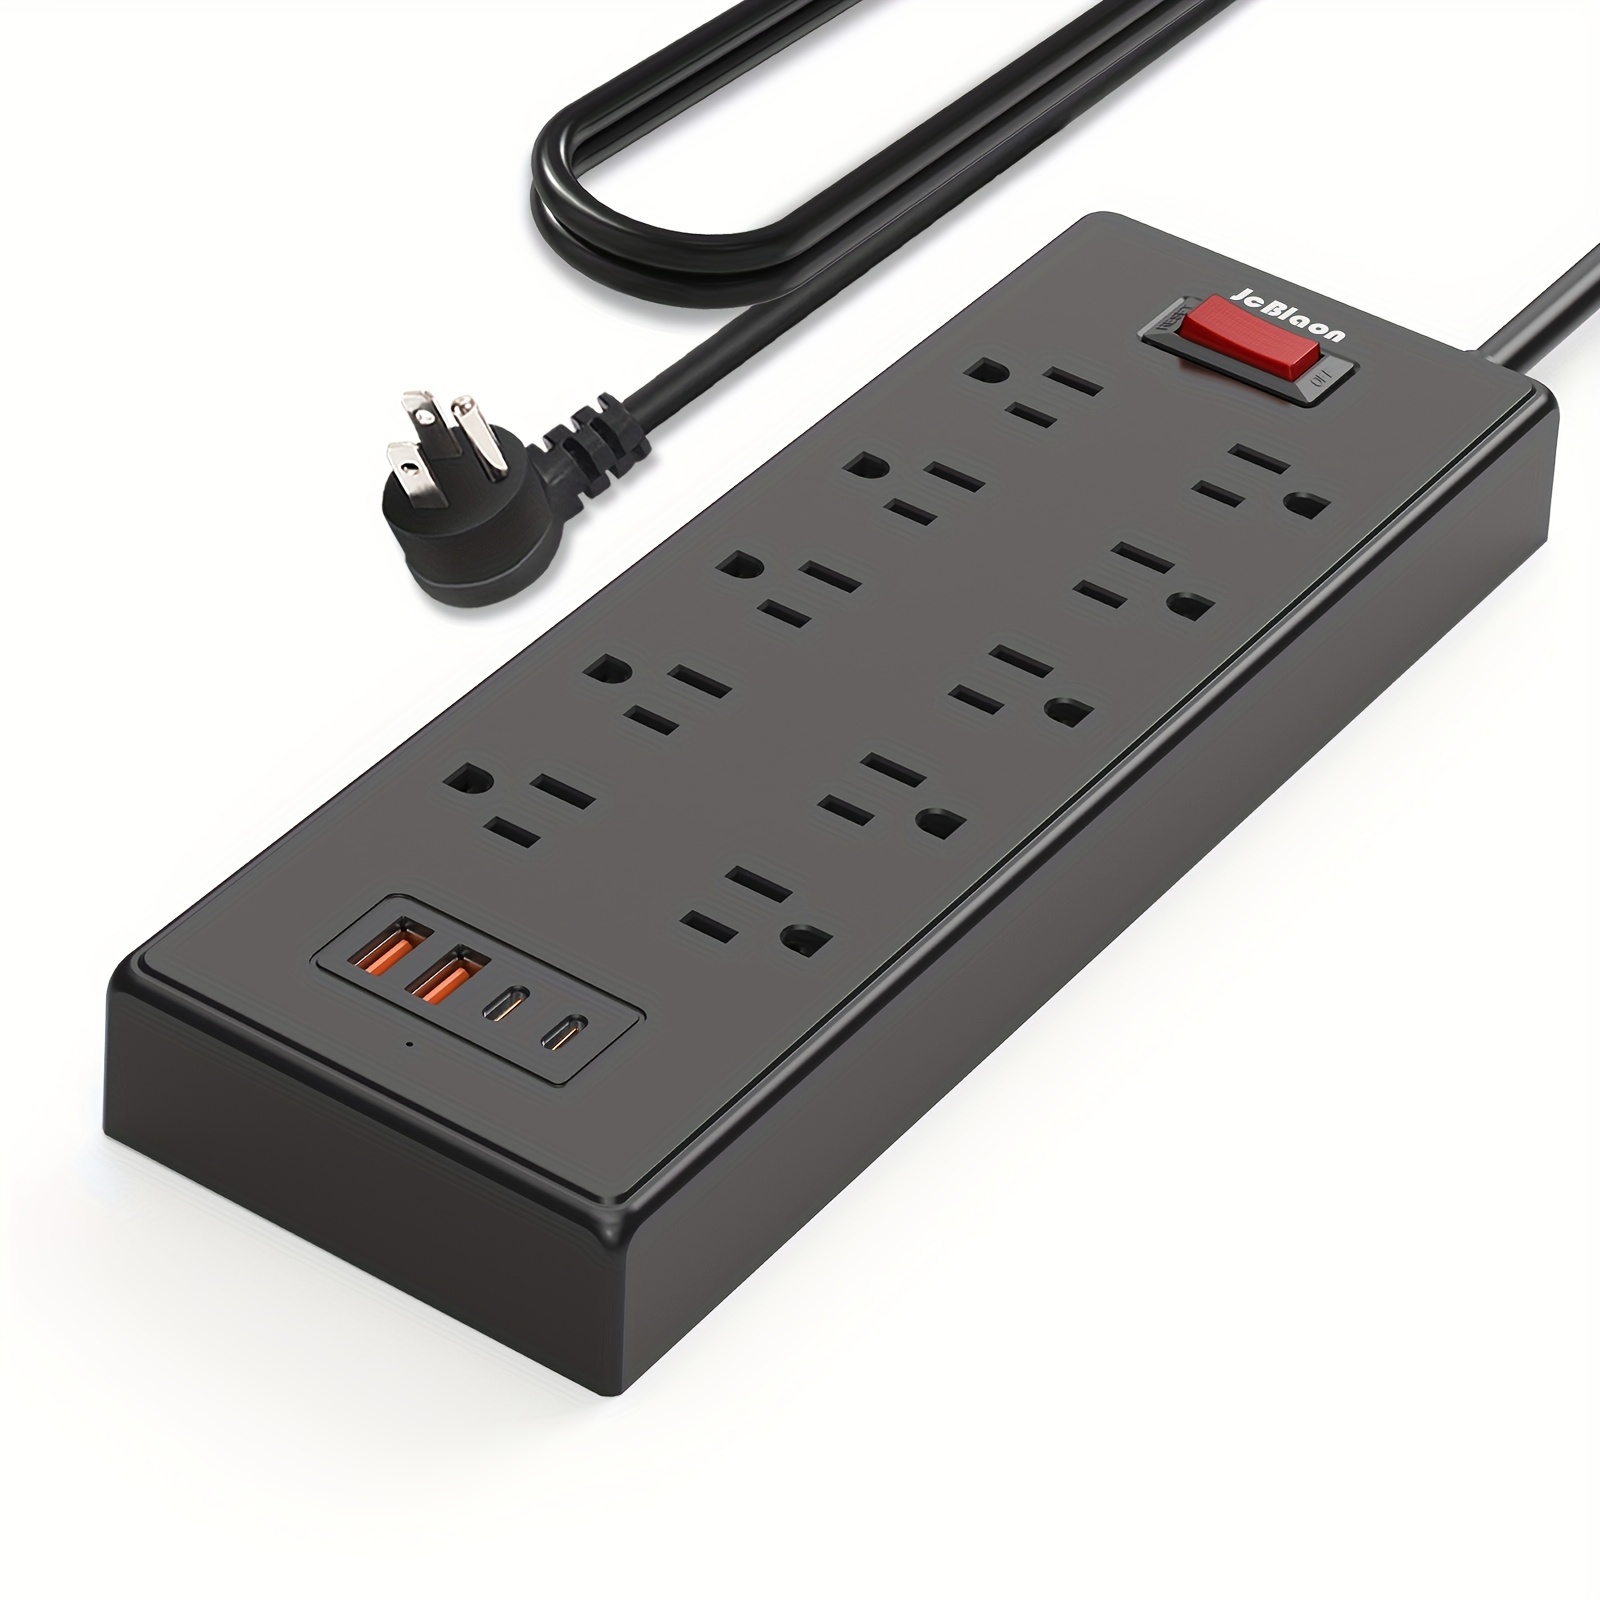 

Power Strip Protector With Usb C Ports, 5ft Flat Plug Extension Cord With Multiple Outlets, 10 Ac Outlets And 4 Usb Ports, Heavy Duty, Wall Mount, Under Desk For Home, Office, Dorm